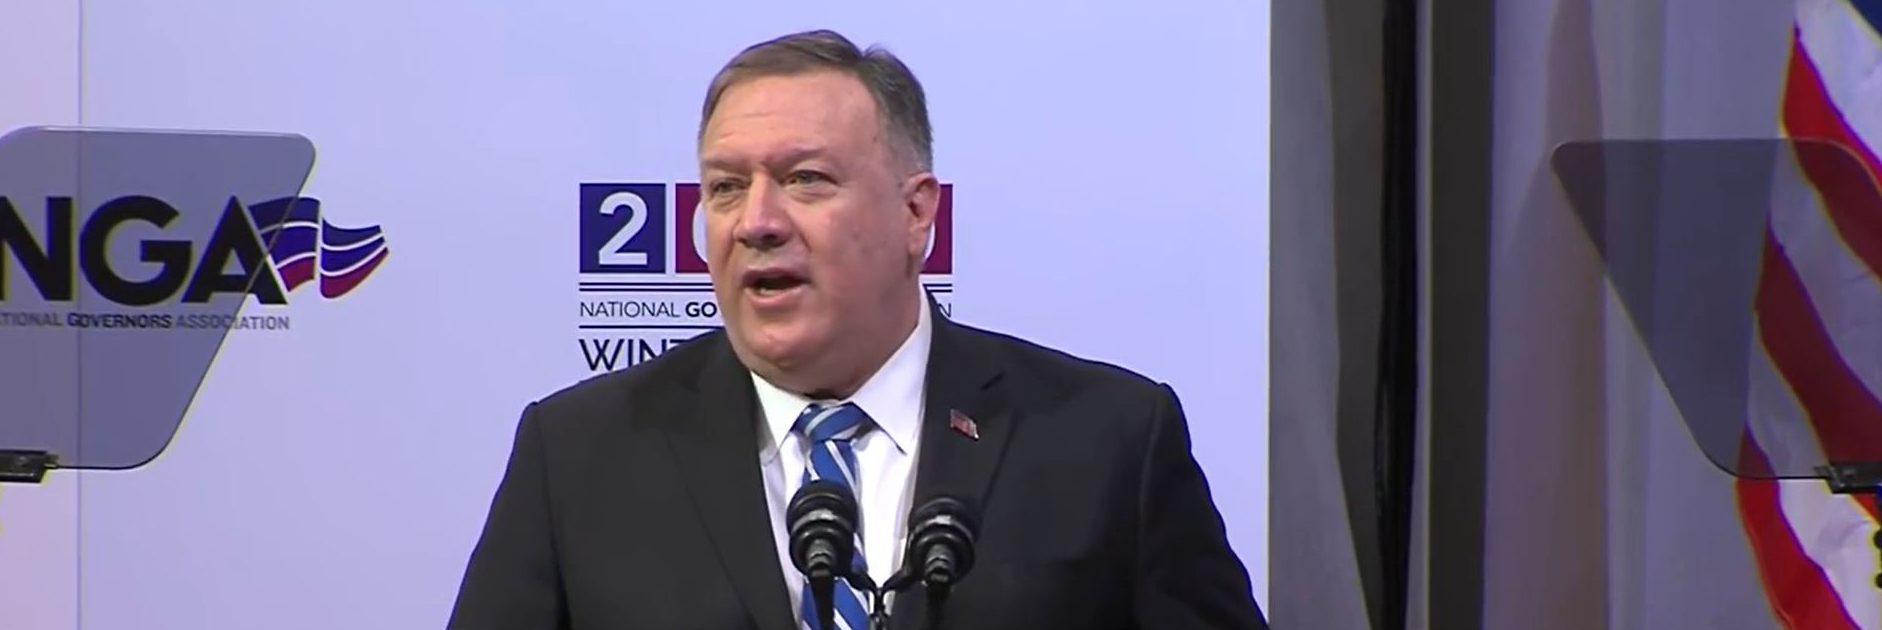 U.S. Secretary of State Mike Pompeo speaking at the Governors' Winter Meeting on February 8, 2020. (Screenshot via U.S. Department of State website)